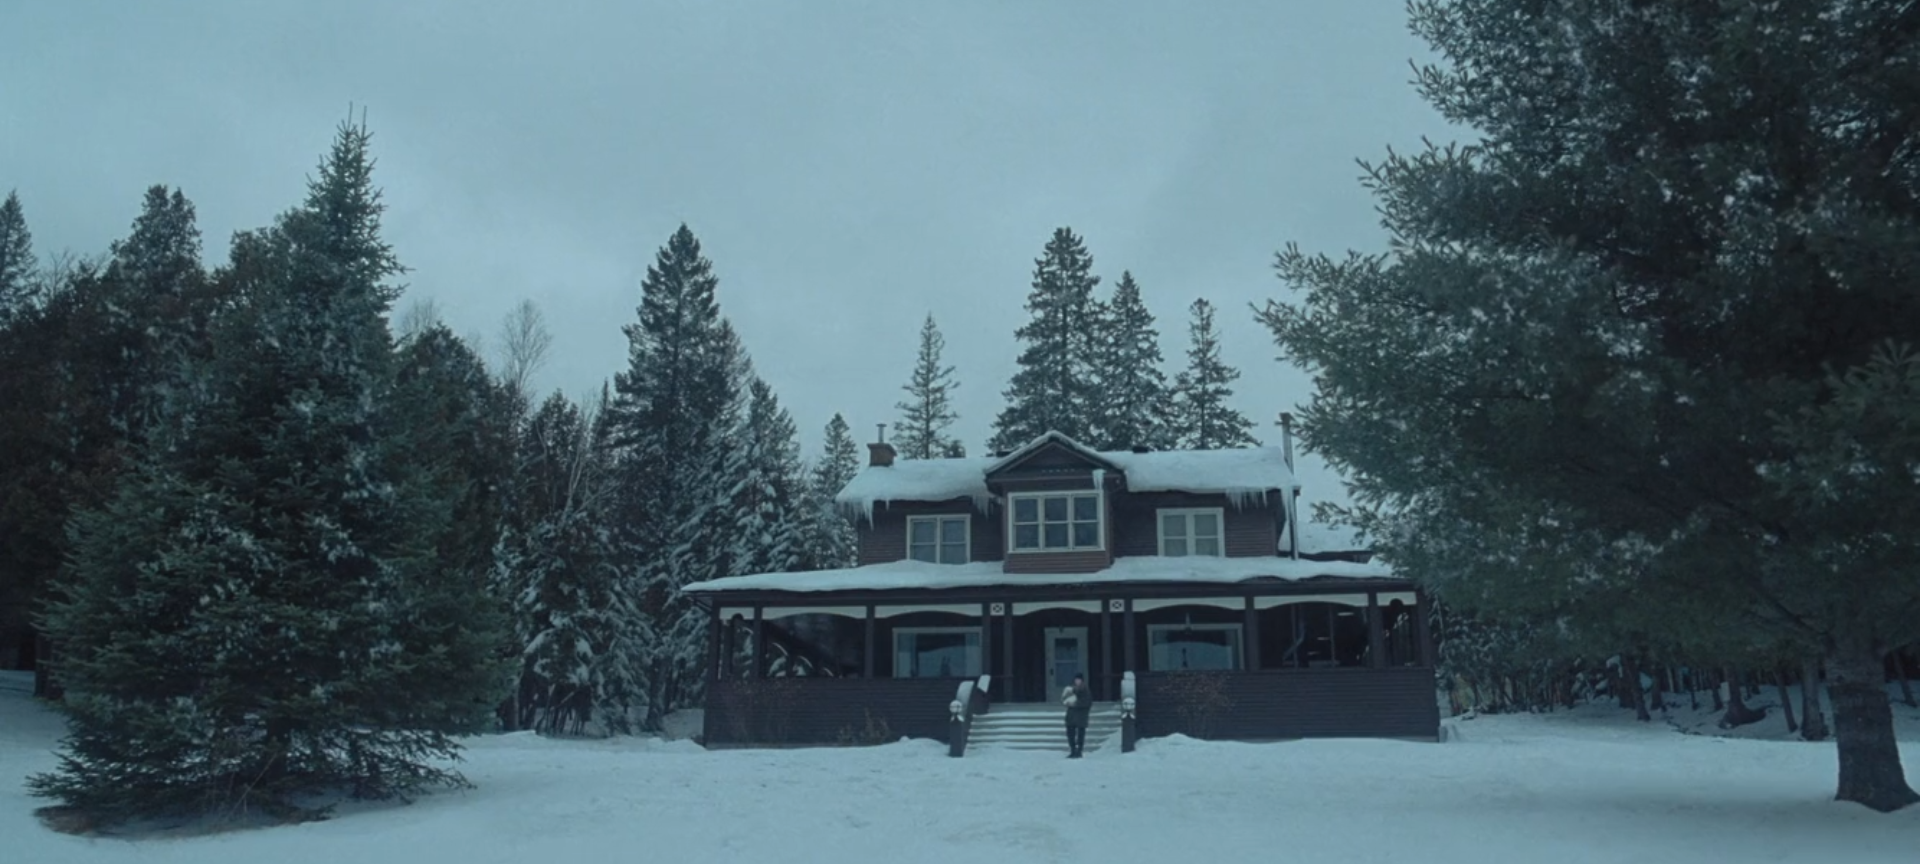 Movie Review: Who will survive “The Lodge?”